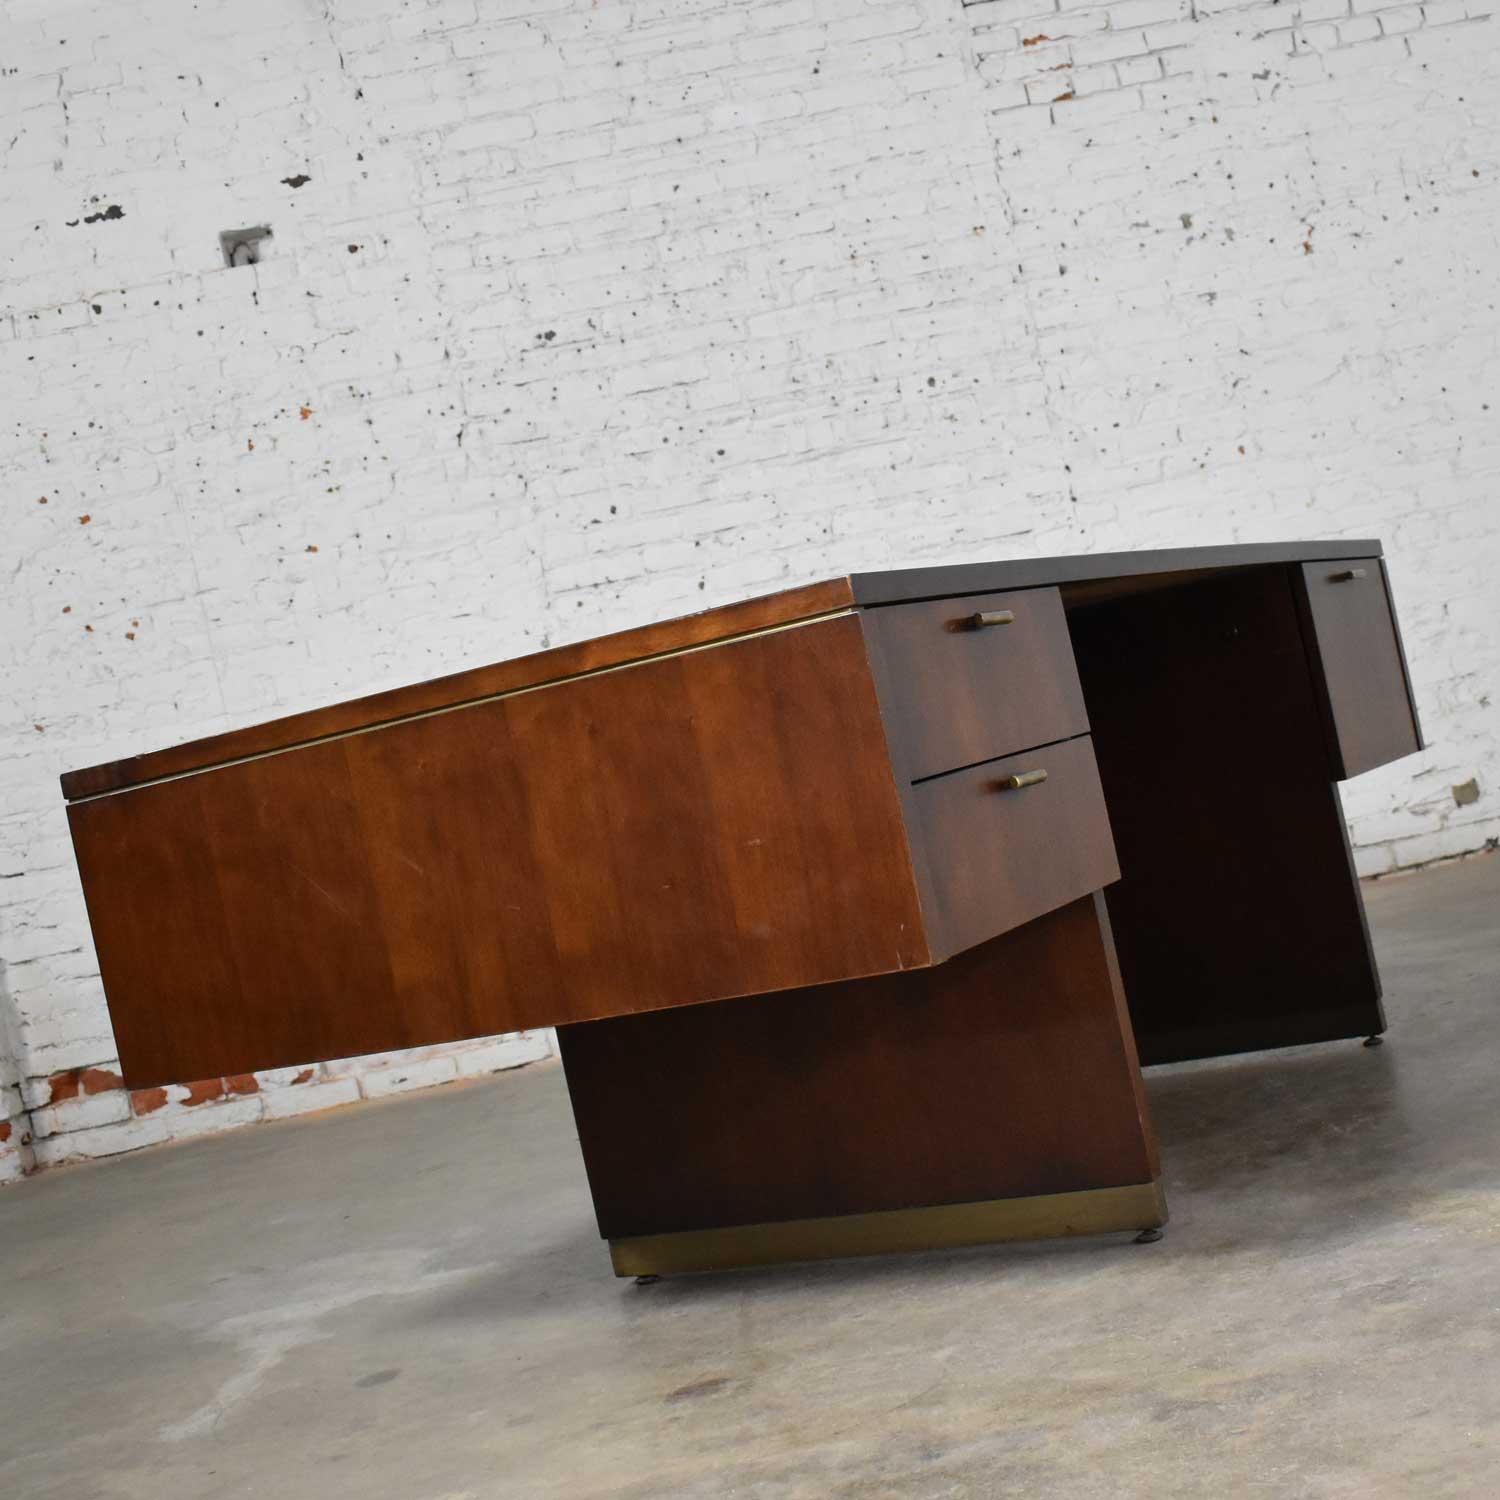 American Large Mid-Century Modern Cantilever Executive Desk & Credenza by Myrtle Desk Co.